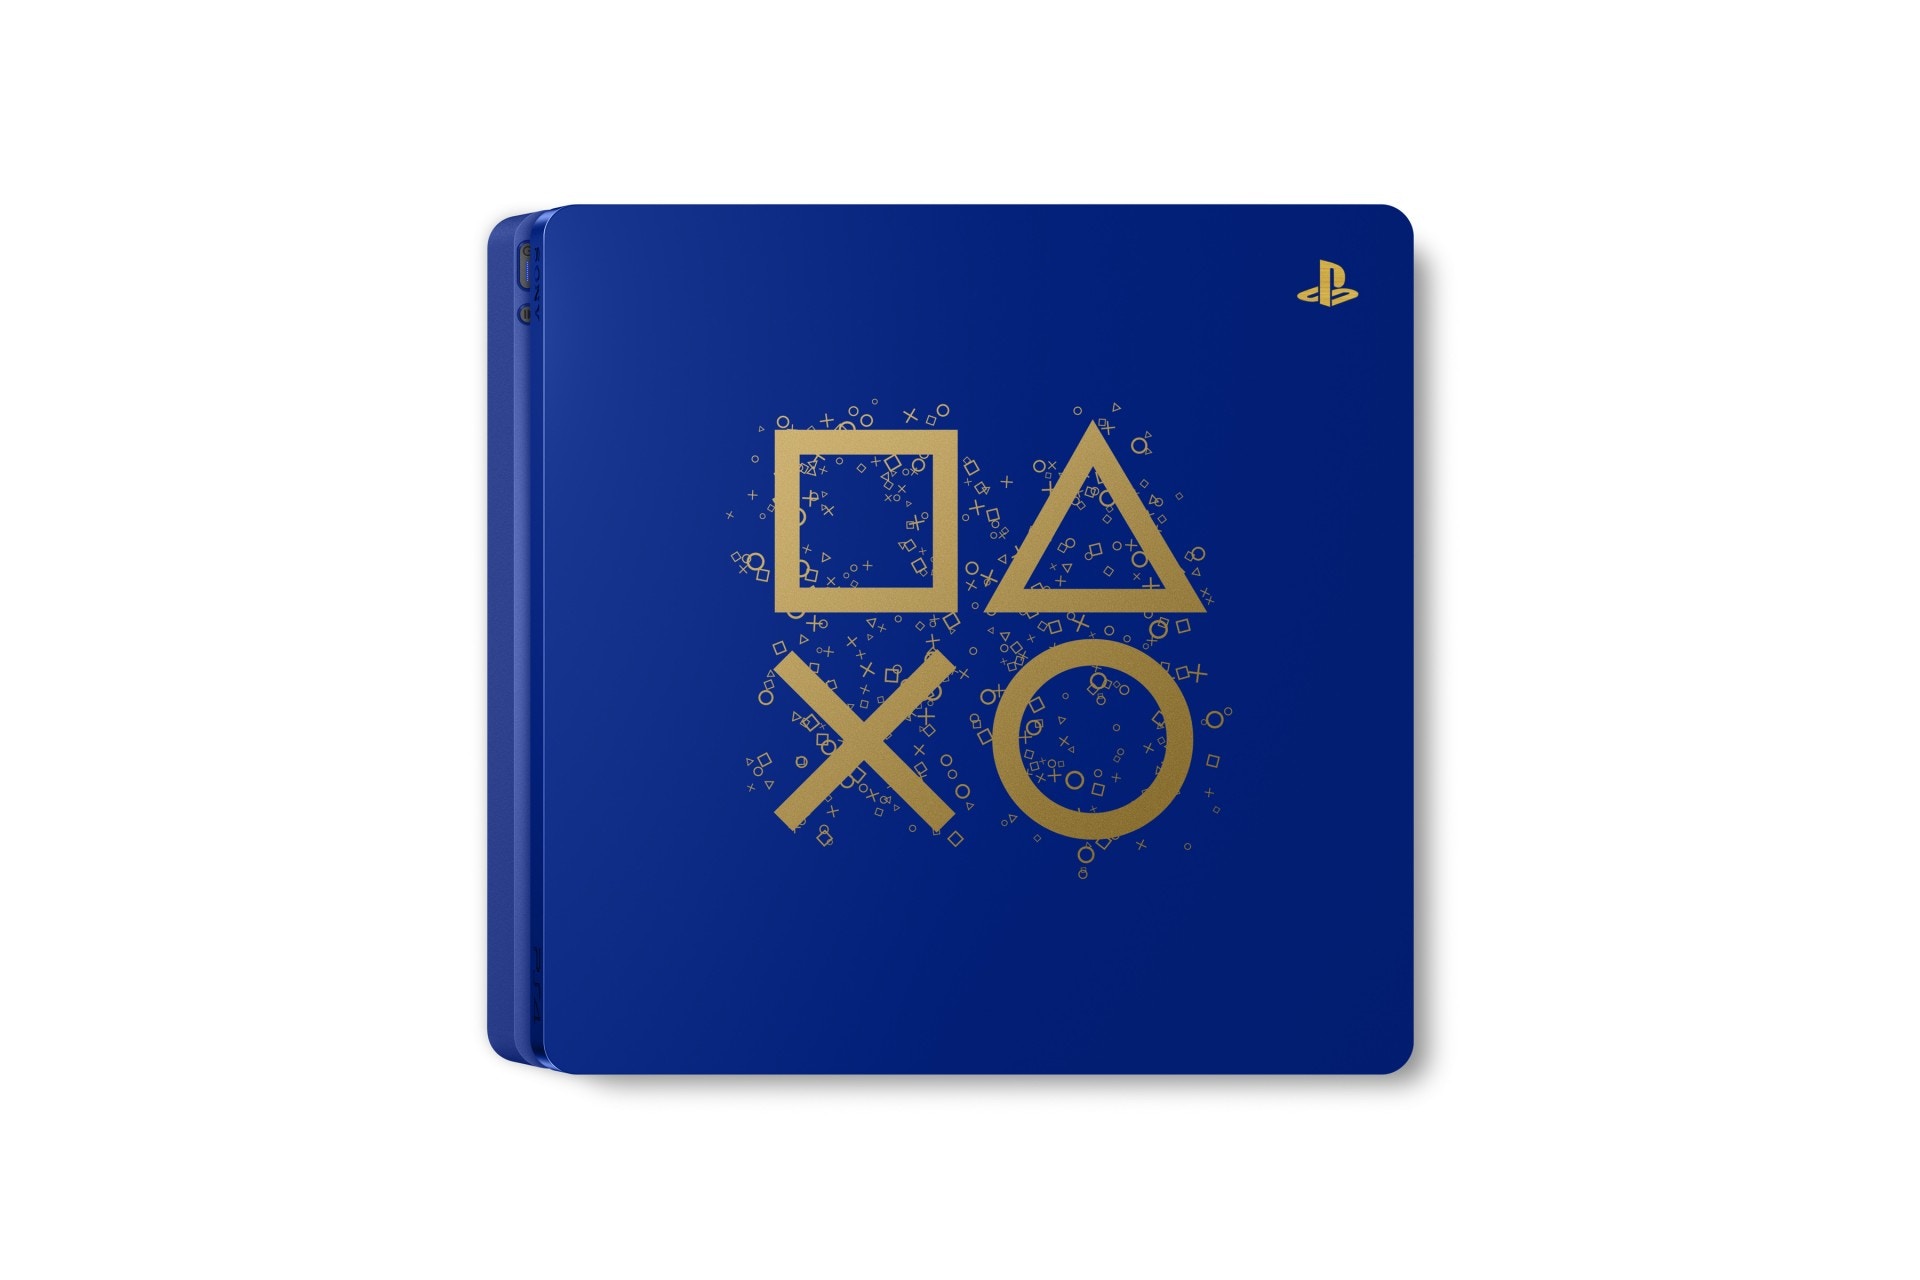 PS4限定版 Days of play Limited Edition 500G-